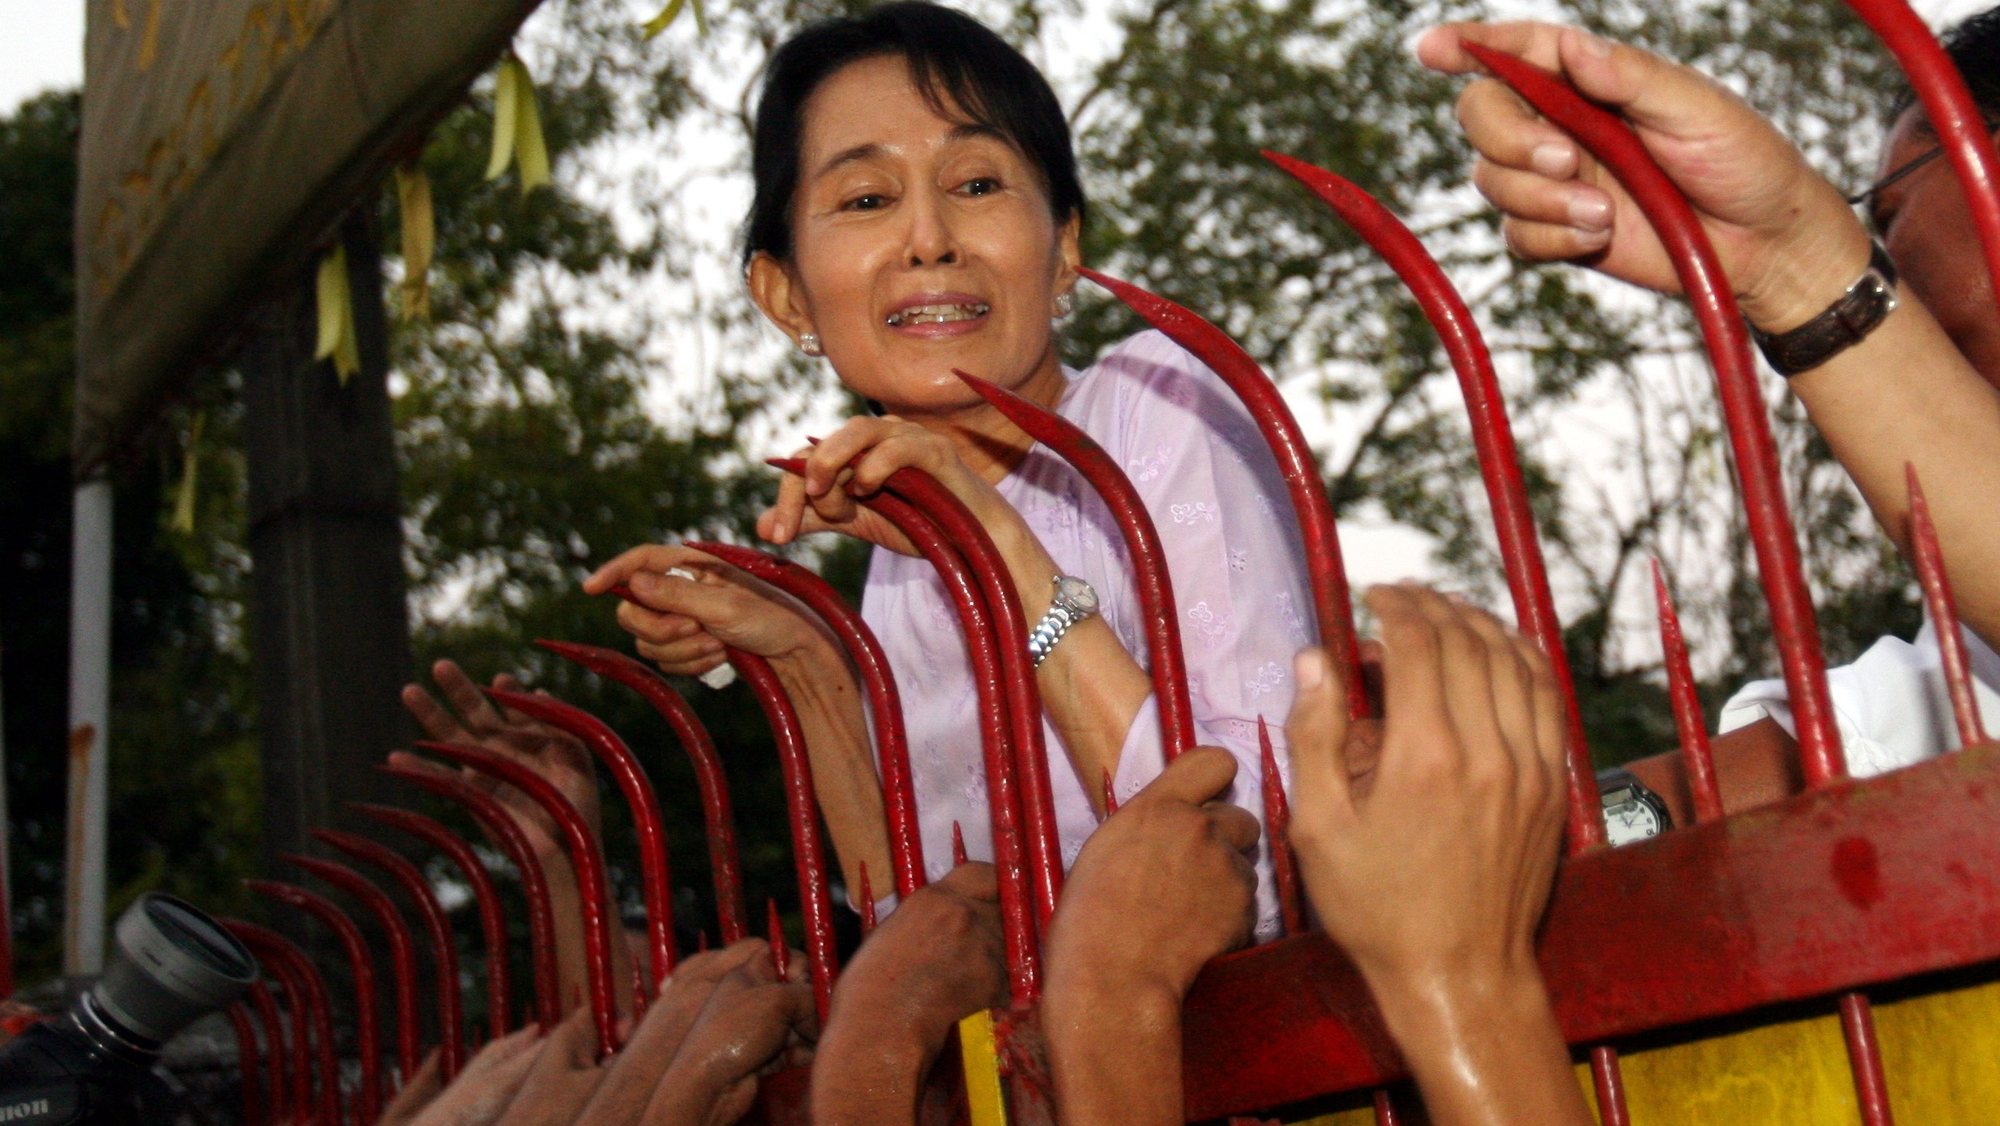 epa08983562 (FILE) - Democracy leader Aung San Suu Kyi, who had been under house arrest, is greeted by thousands of supporters over the fence of her house as she is set free in Yangon, Myanmar (Burma), 13 November 2010 (reissued 03 February 2021). Myanmar&#039;s military seized power and declared a state of emergency for one year after arresting State Counselor Aung San Suu Kyi and Myanmar president Win Myint in an early morning raid on 01 February, following increasing tension over the result of last November&#039;s parliamentary elections.  EPA/NYEIN CHAN NAING *** Local Caption *** 02445323